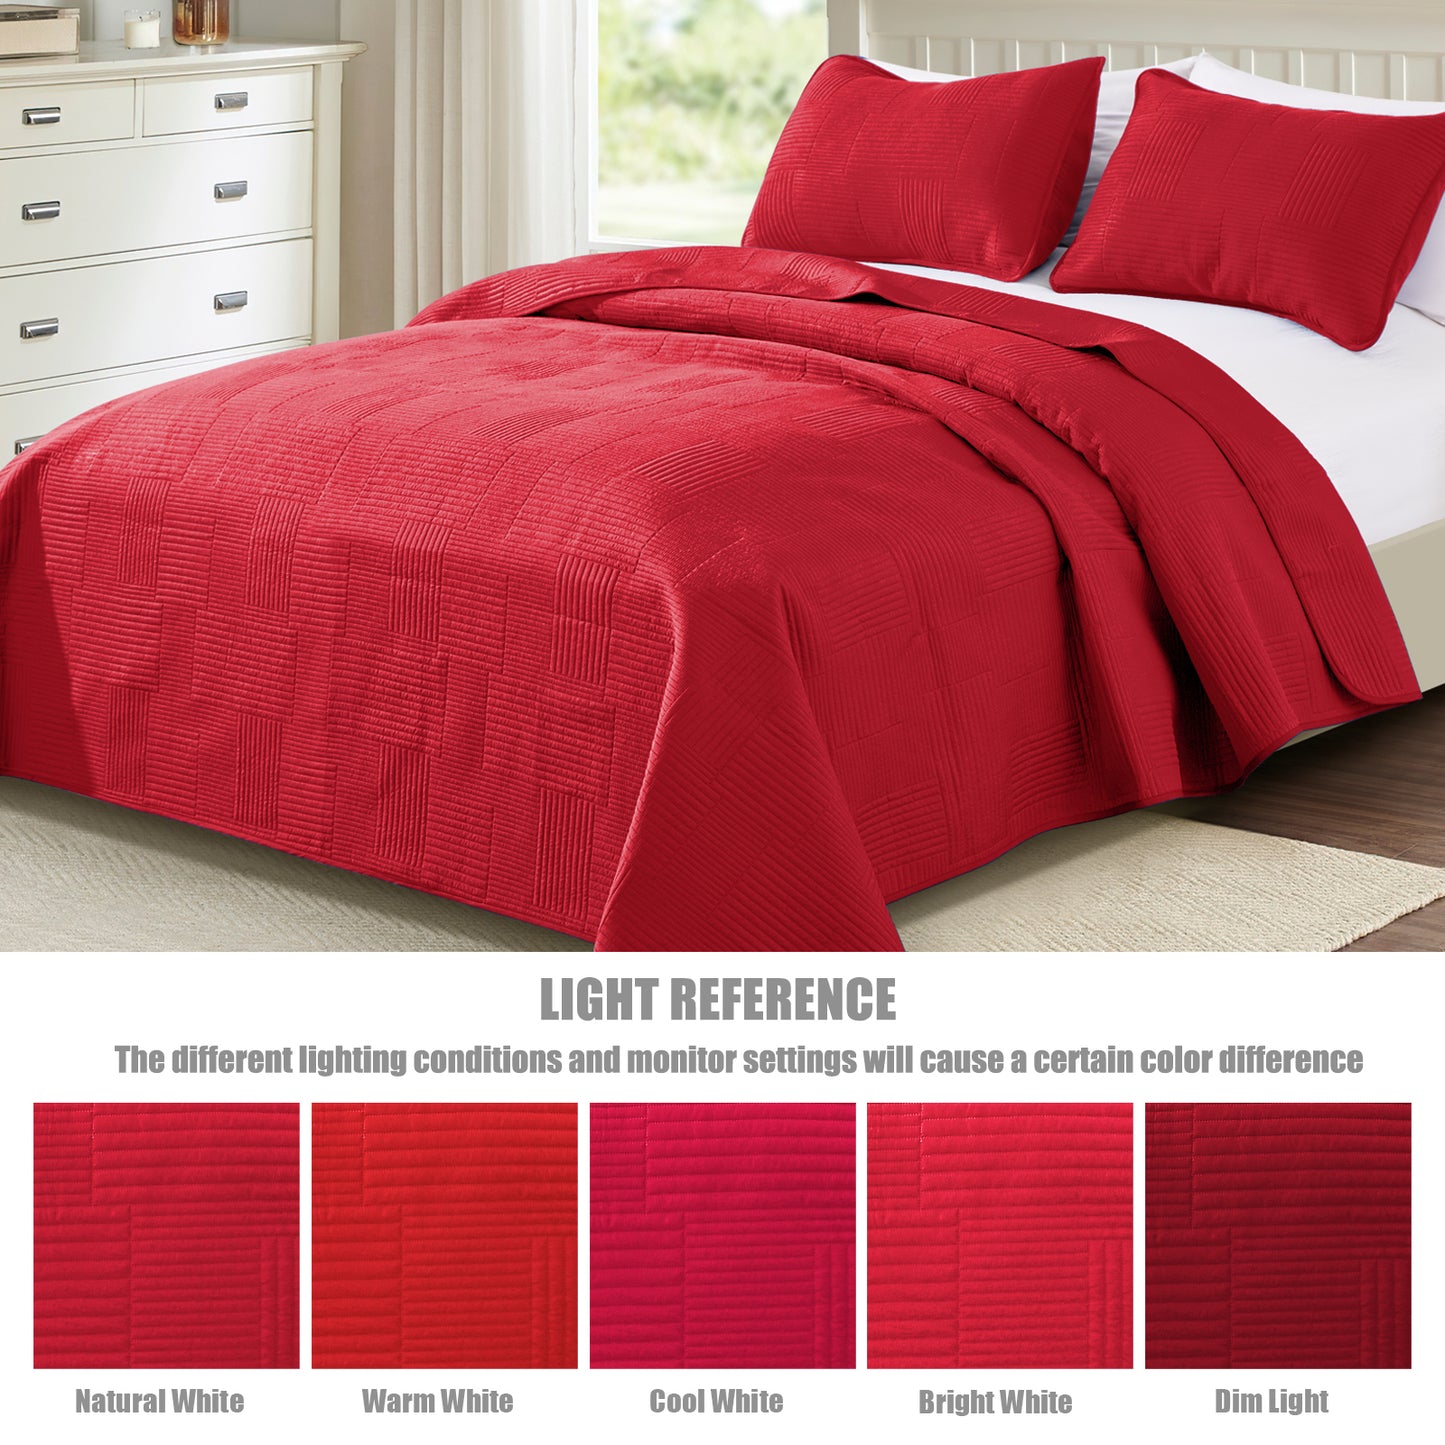 Exclusivo Mezcla Twin Quilt Set, Soft and Lightweight Bedspreads Coverlet with Striped Pattern, Bedding Sets with Pillow Sham, Reversible Bed Cover for All Seasons, 68x88 Inches, Red Grid